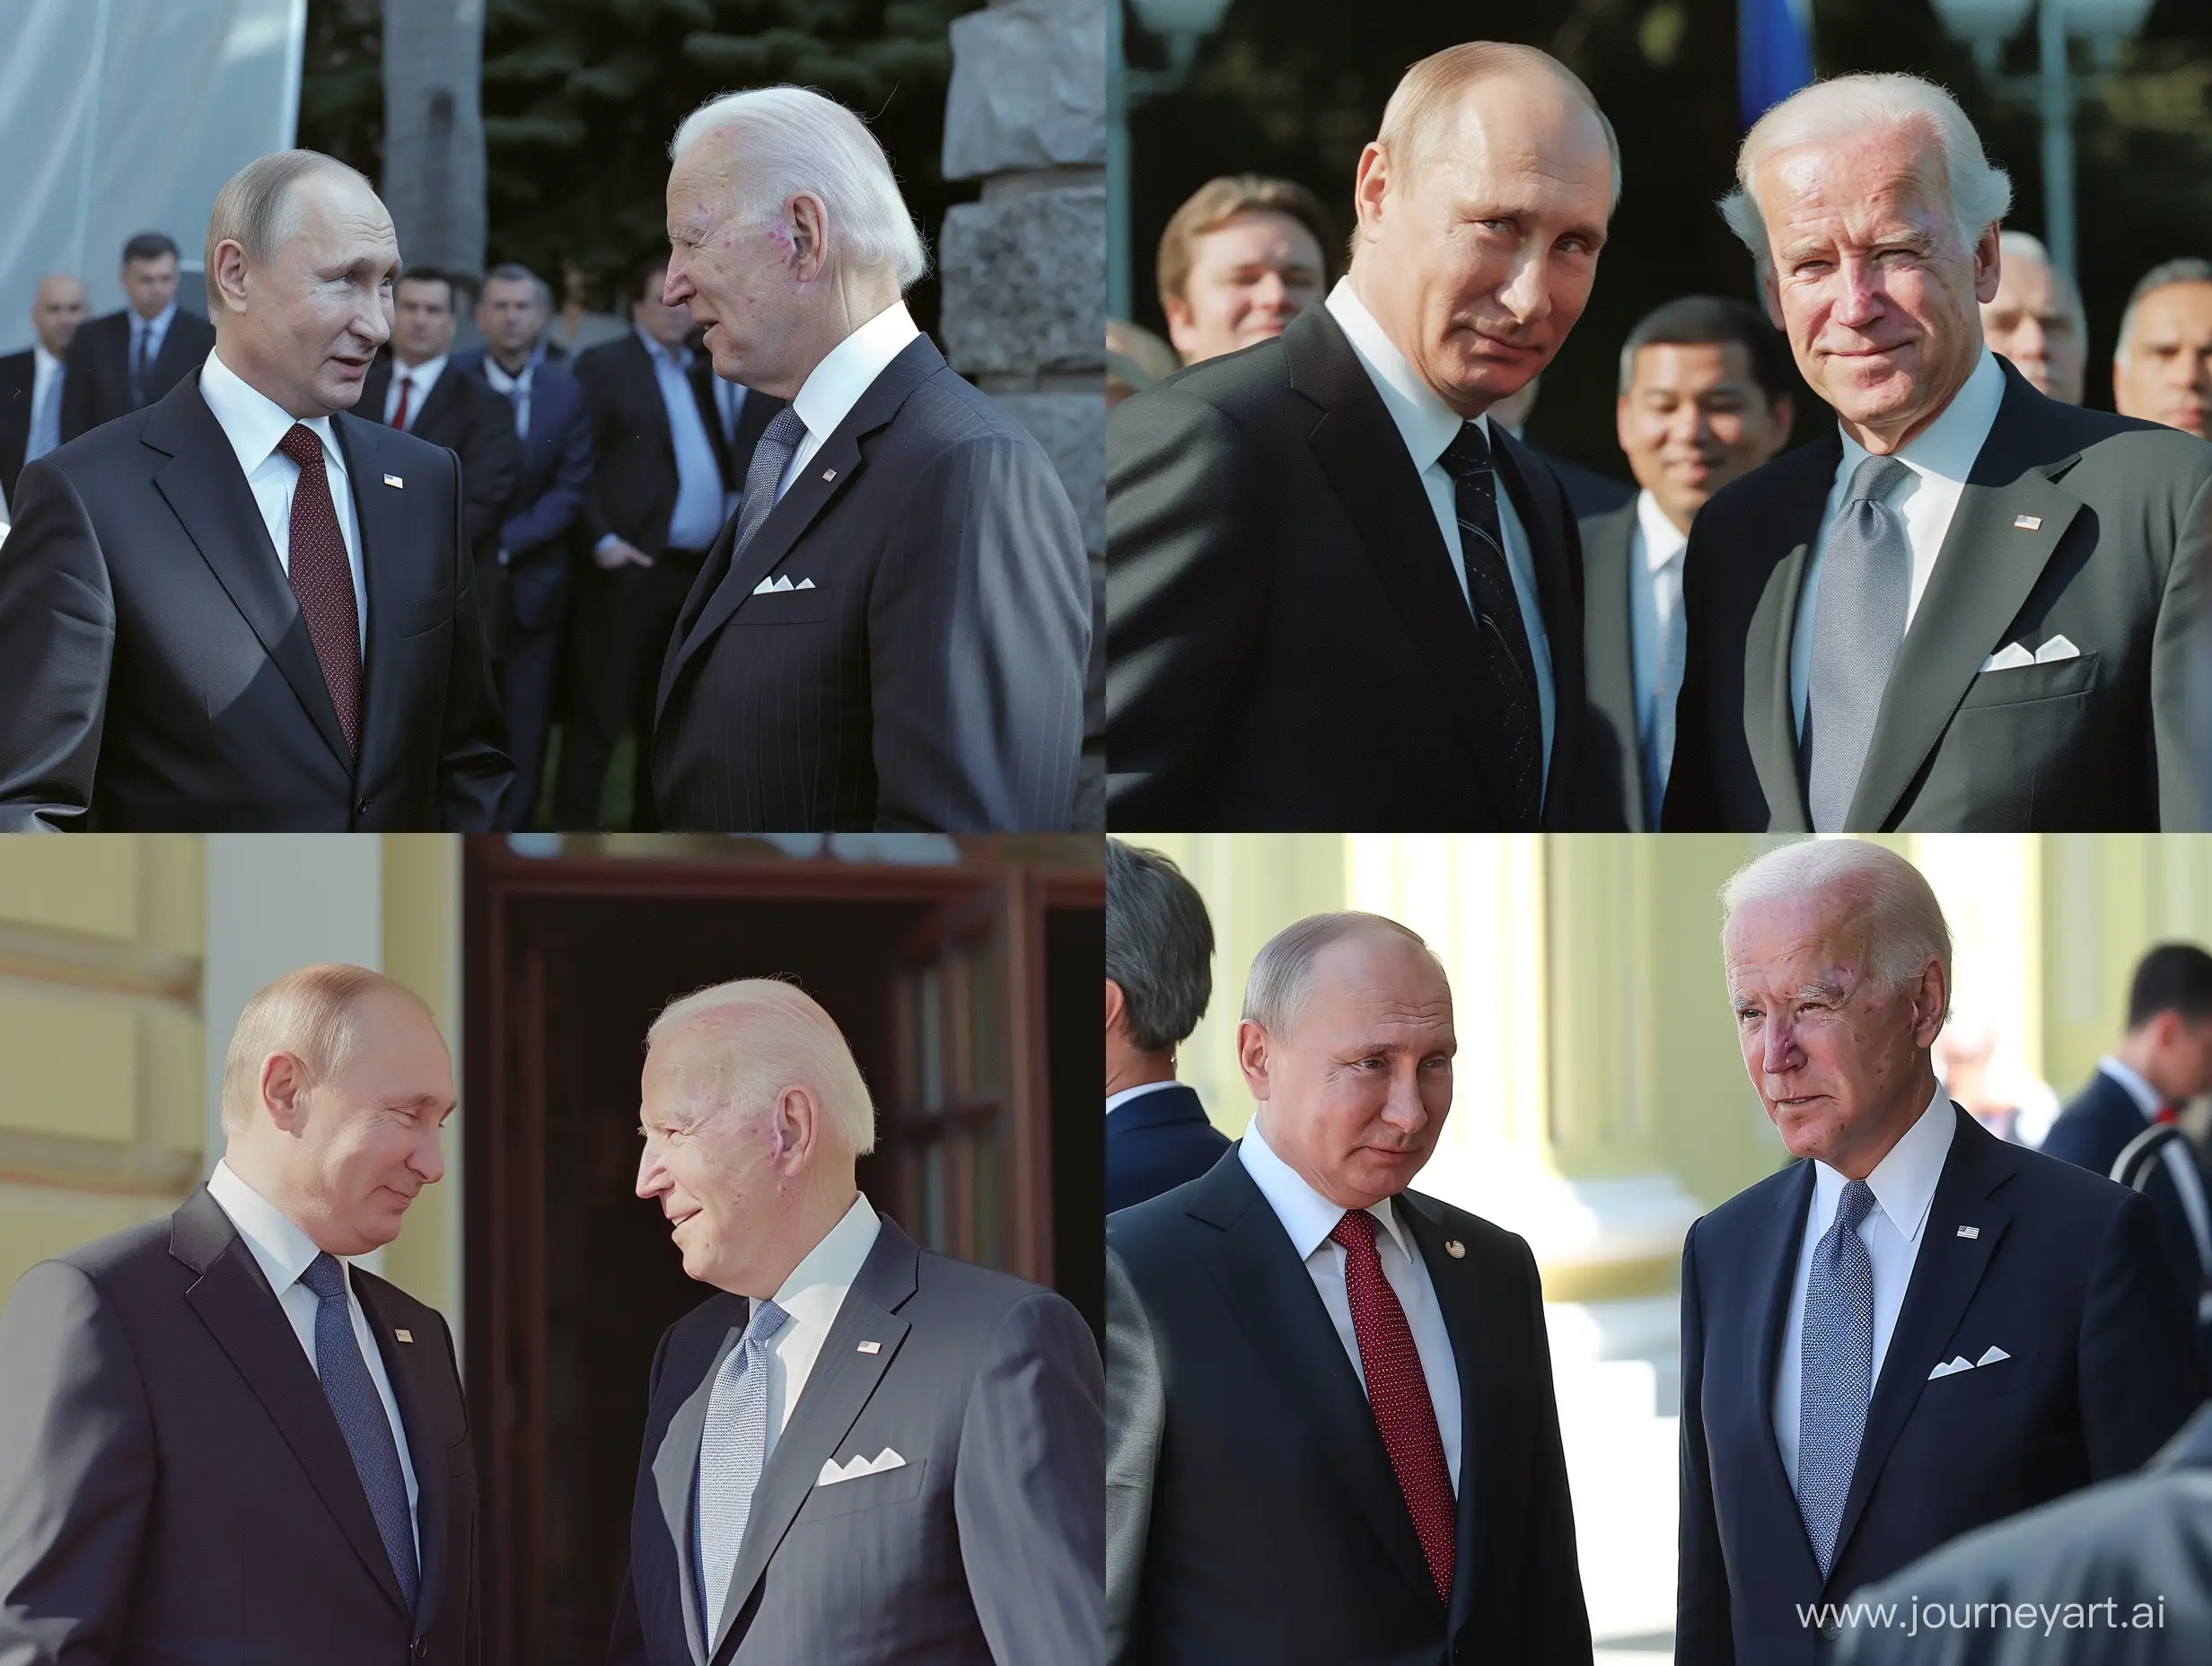 The image depicts a meeting between Vladimir Putin and Joe Biden outdoors, taken with Kodak Gold 200 film. The photograph offers a detailed look at both individuals and their environment.